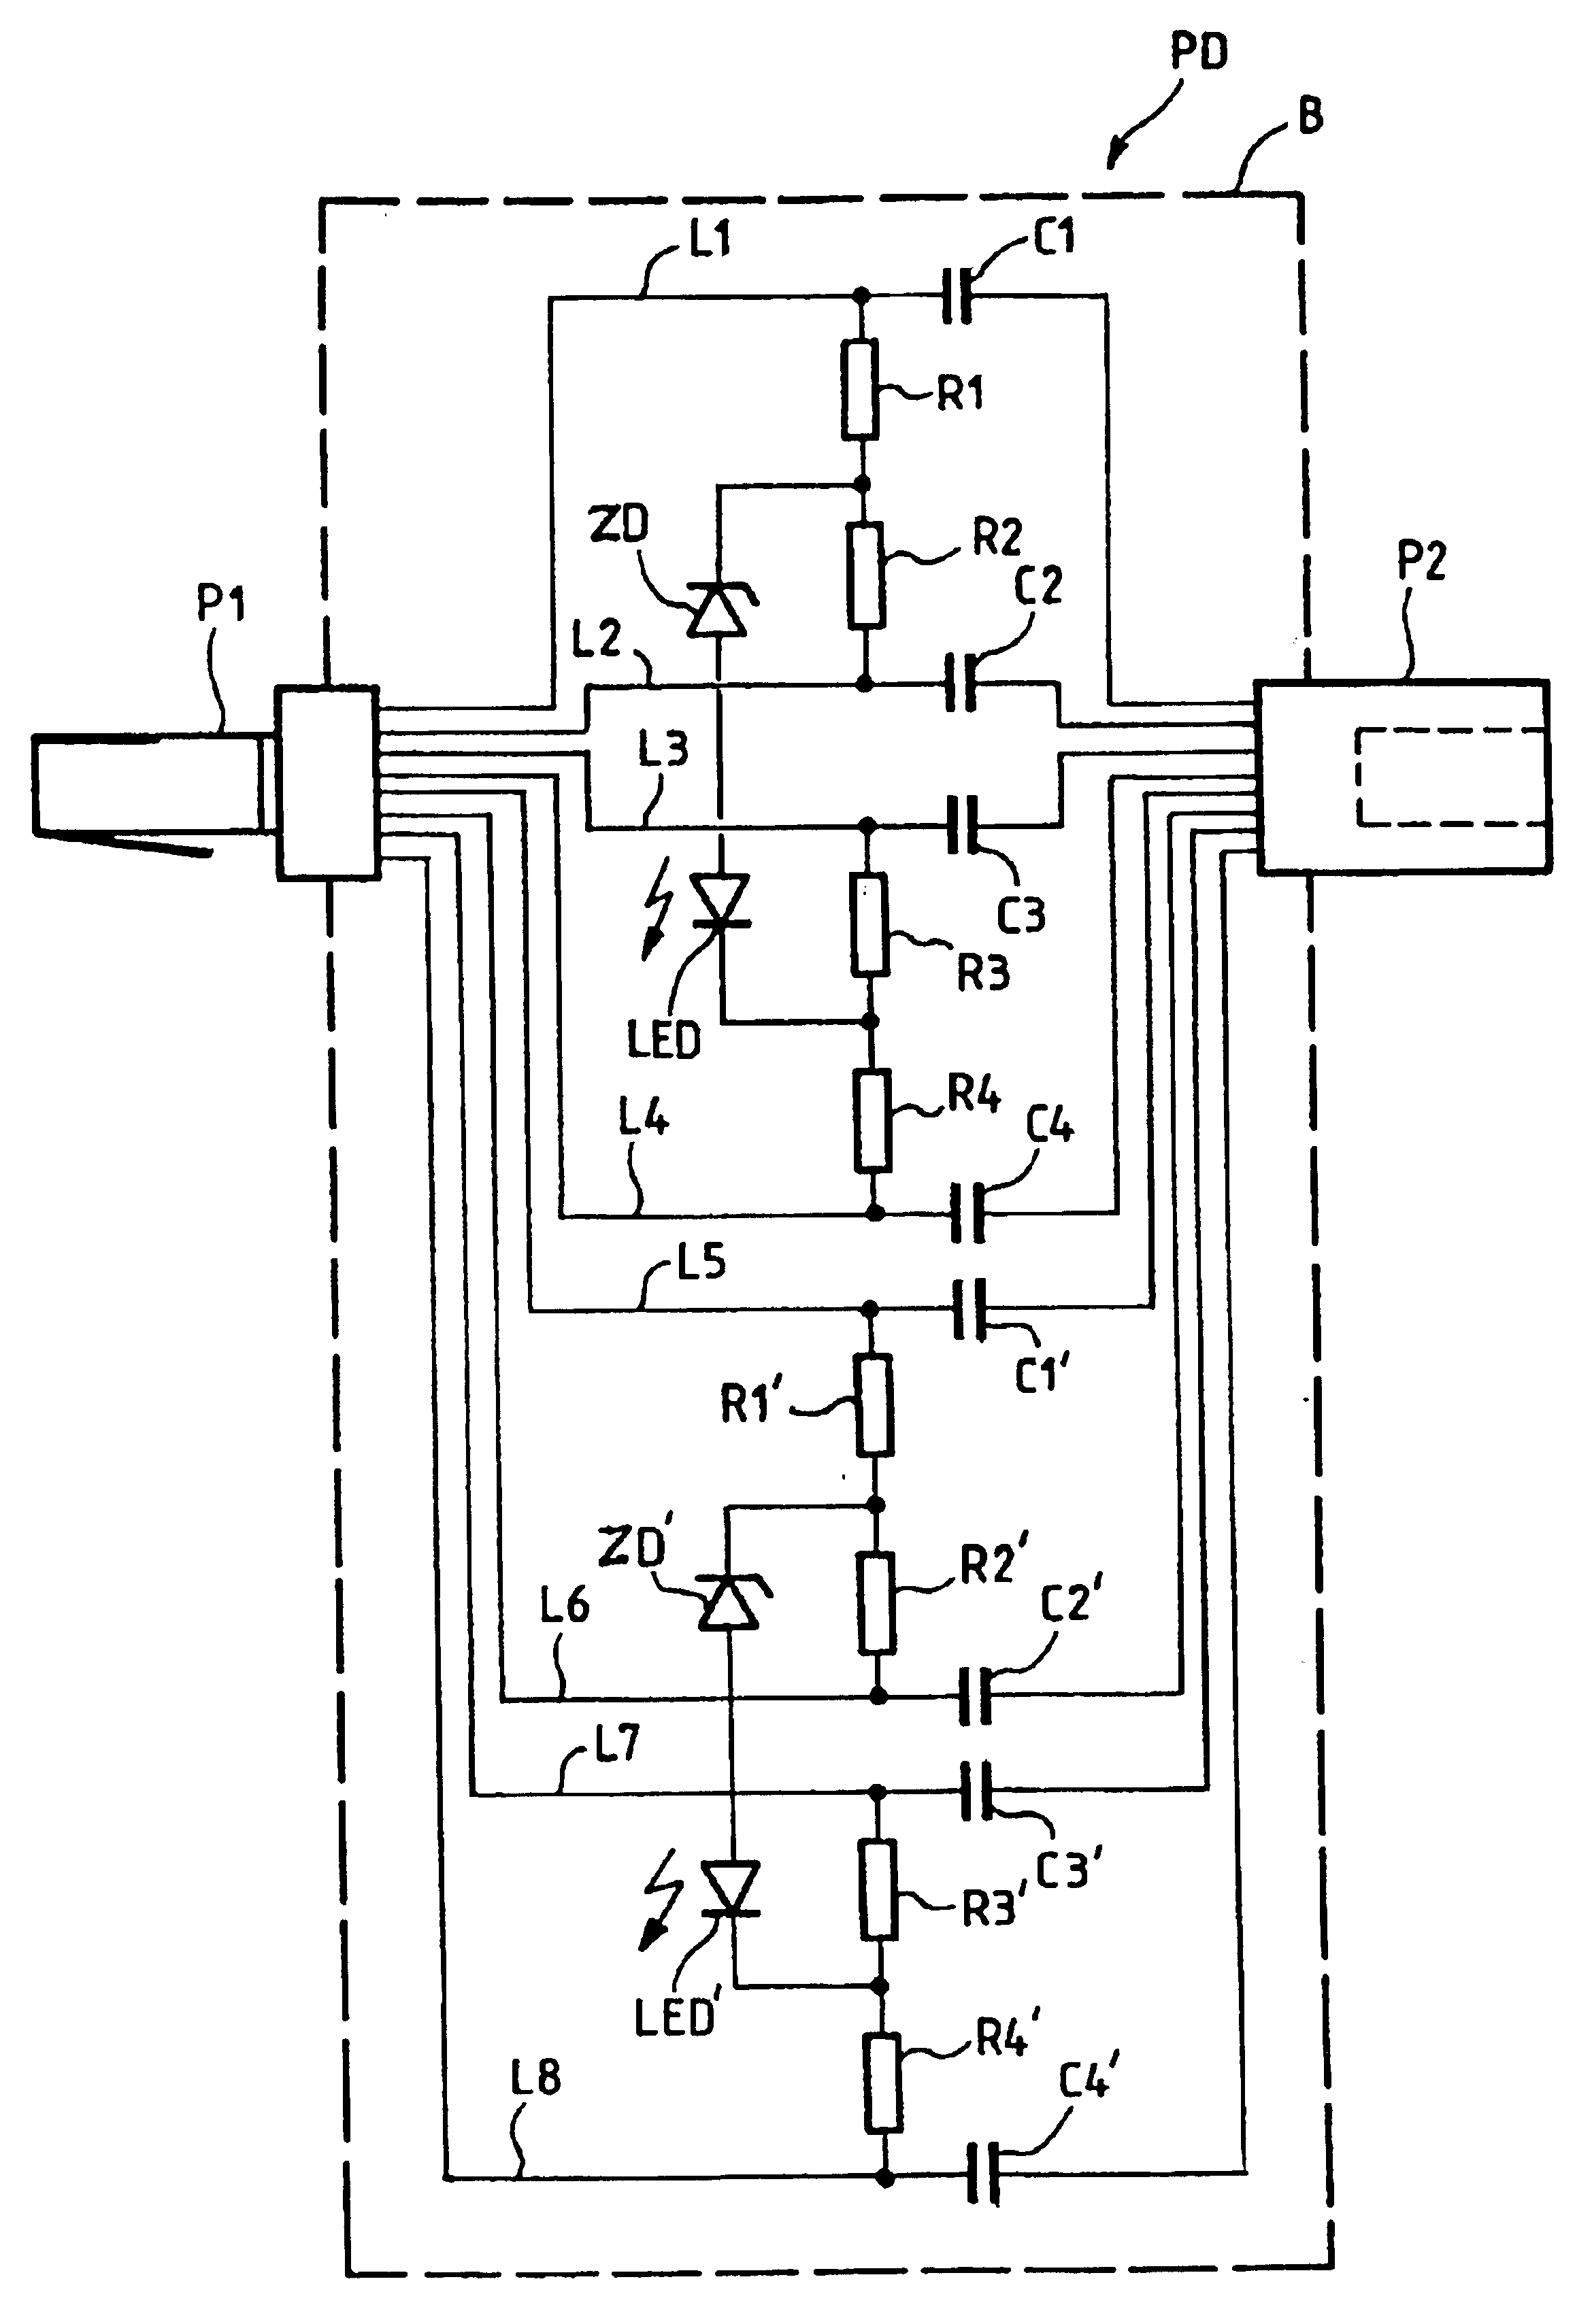 Protection device for a terminal that can be connected to a local area network capable of providing a remote power feed to terminals